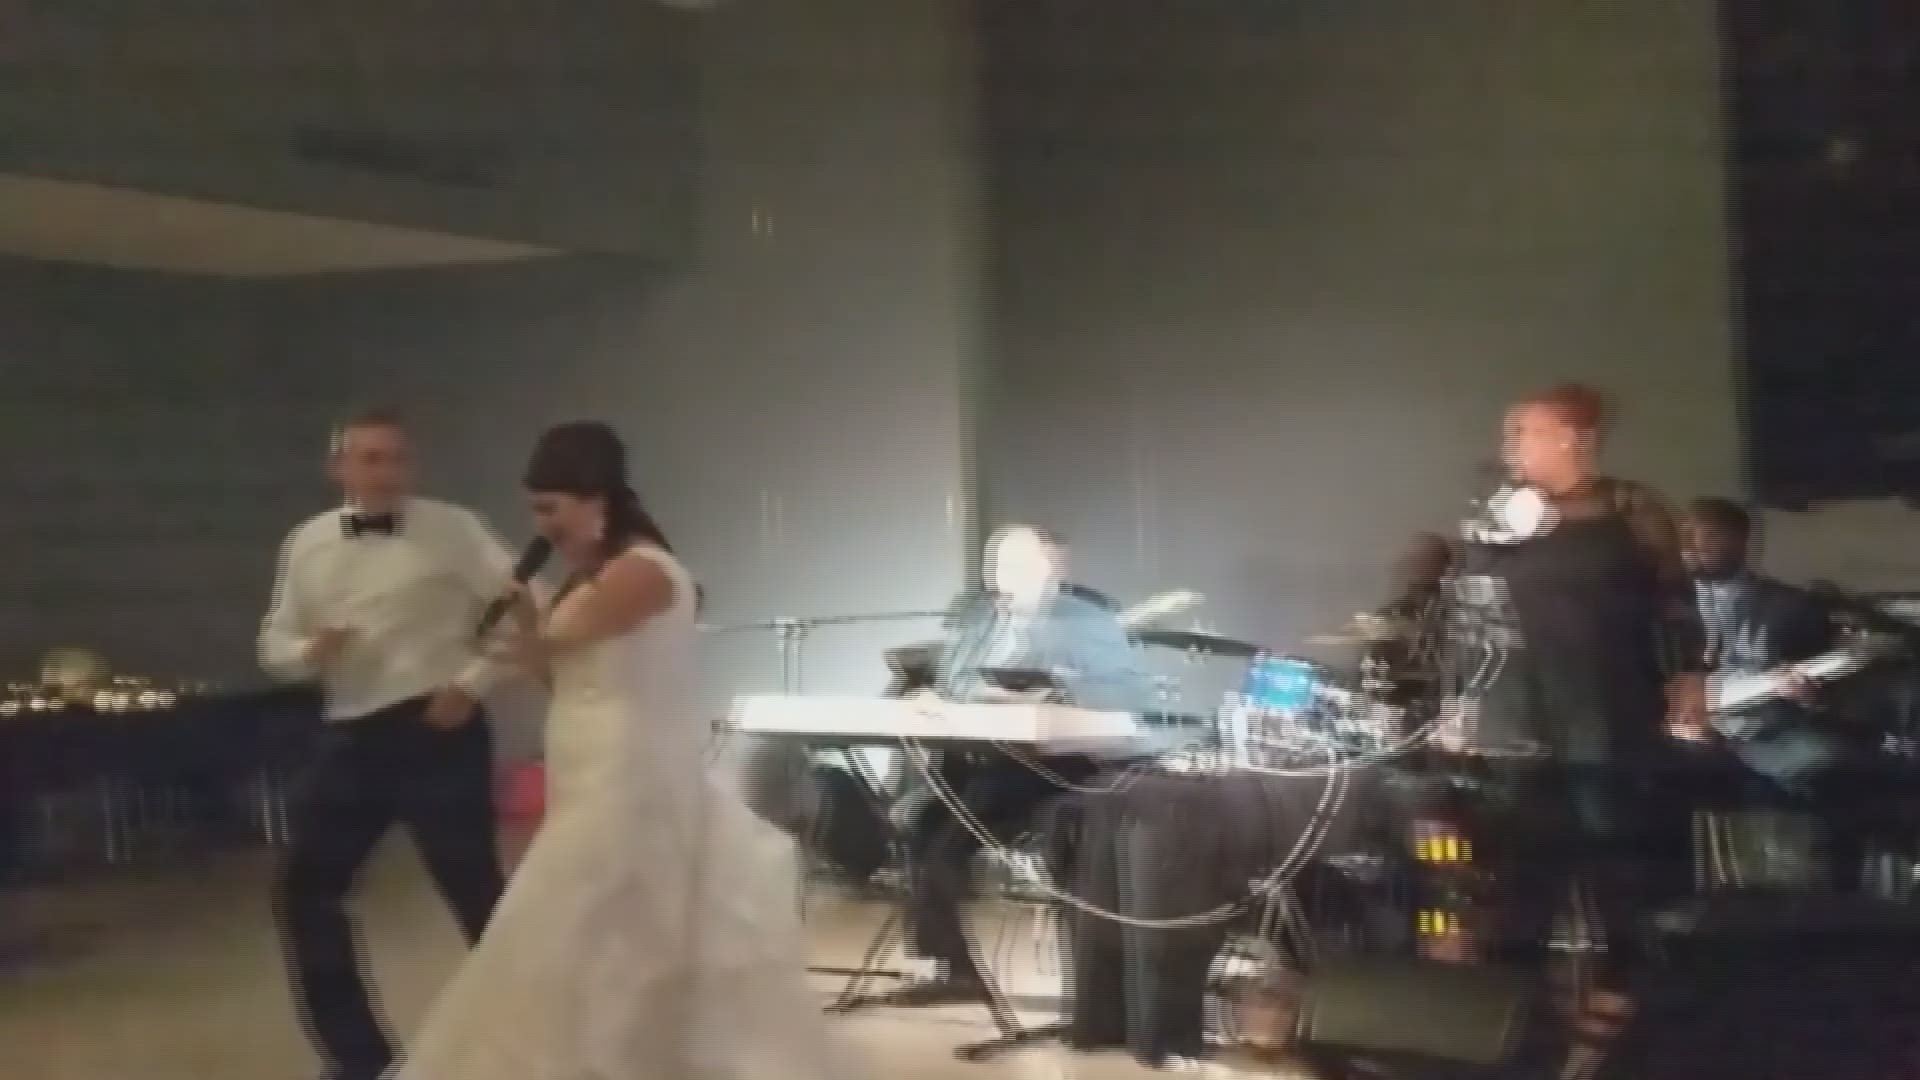 Blues national anthem singer performs &#39;Gloria&#39; at St. Louis couple&#39;s wedding | www.strongerinc.org